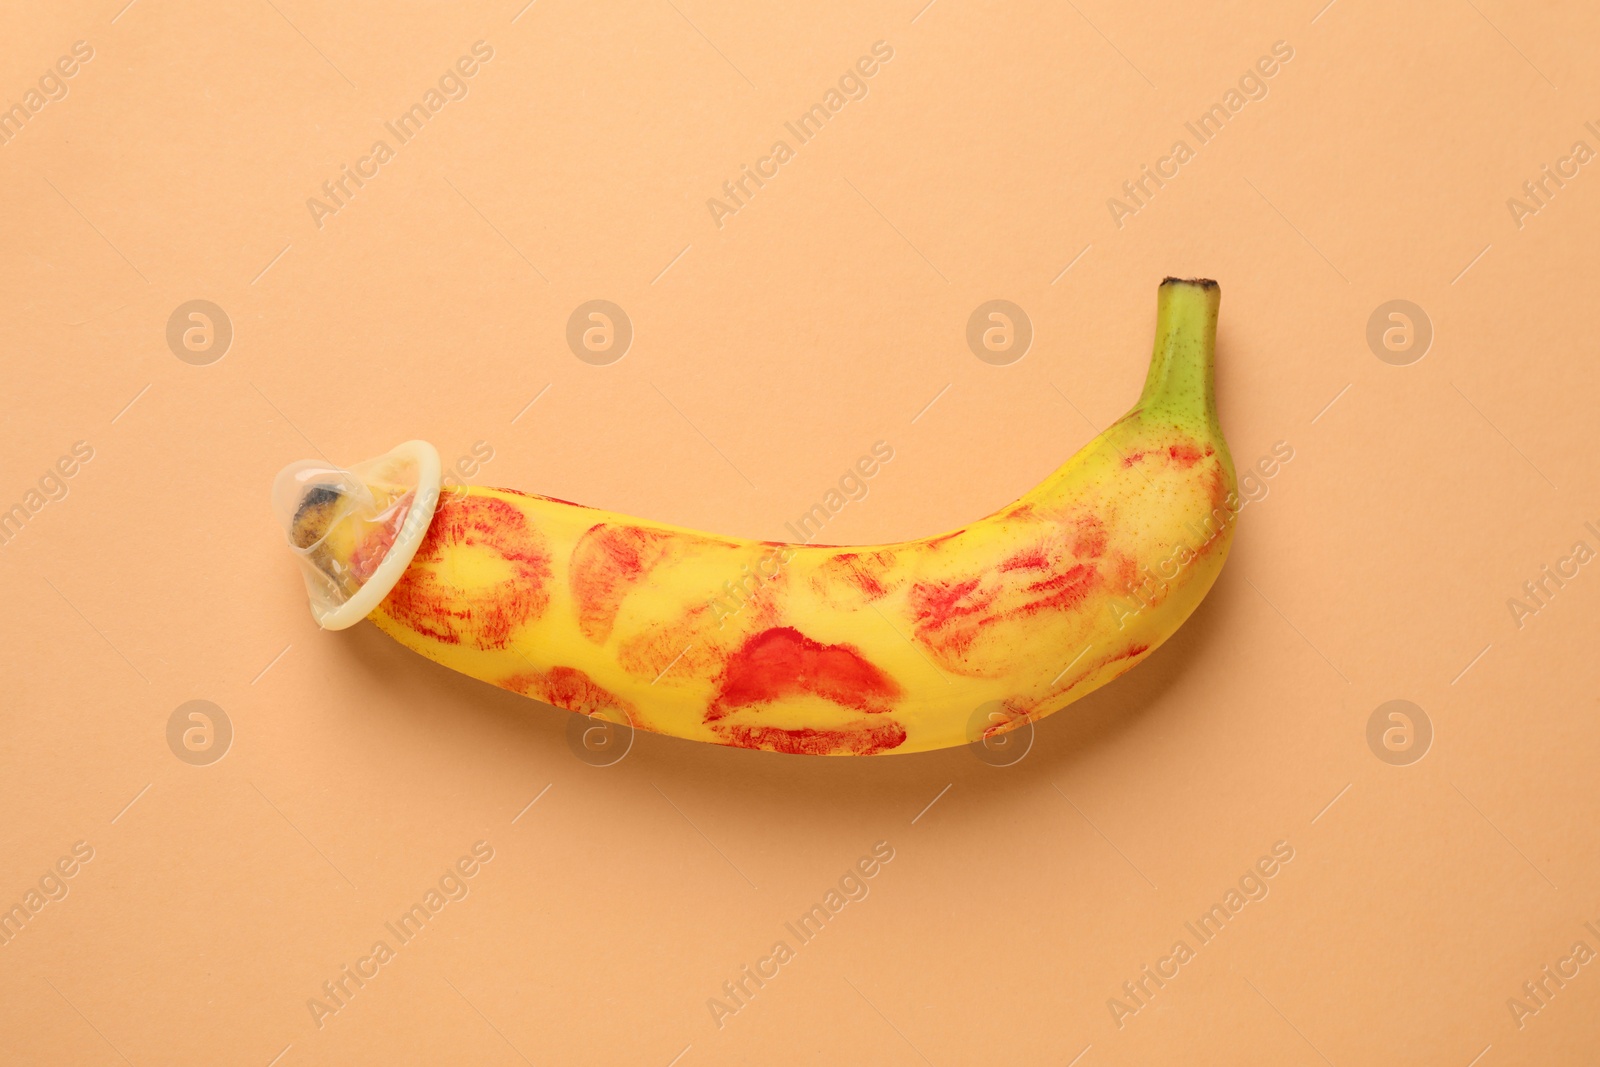 Photo of Banana with condom and red lipstick marks on pale orange background, top view. Safe sex concept